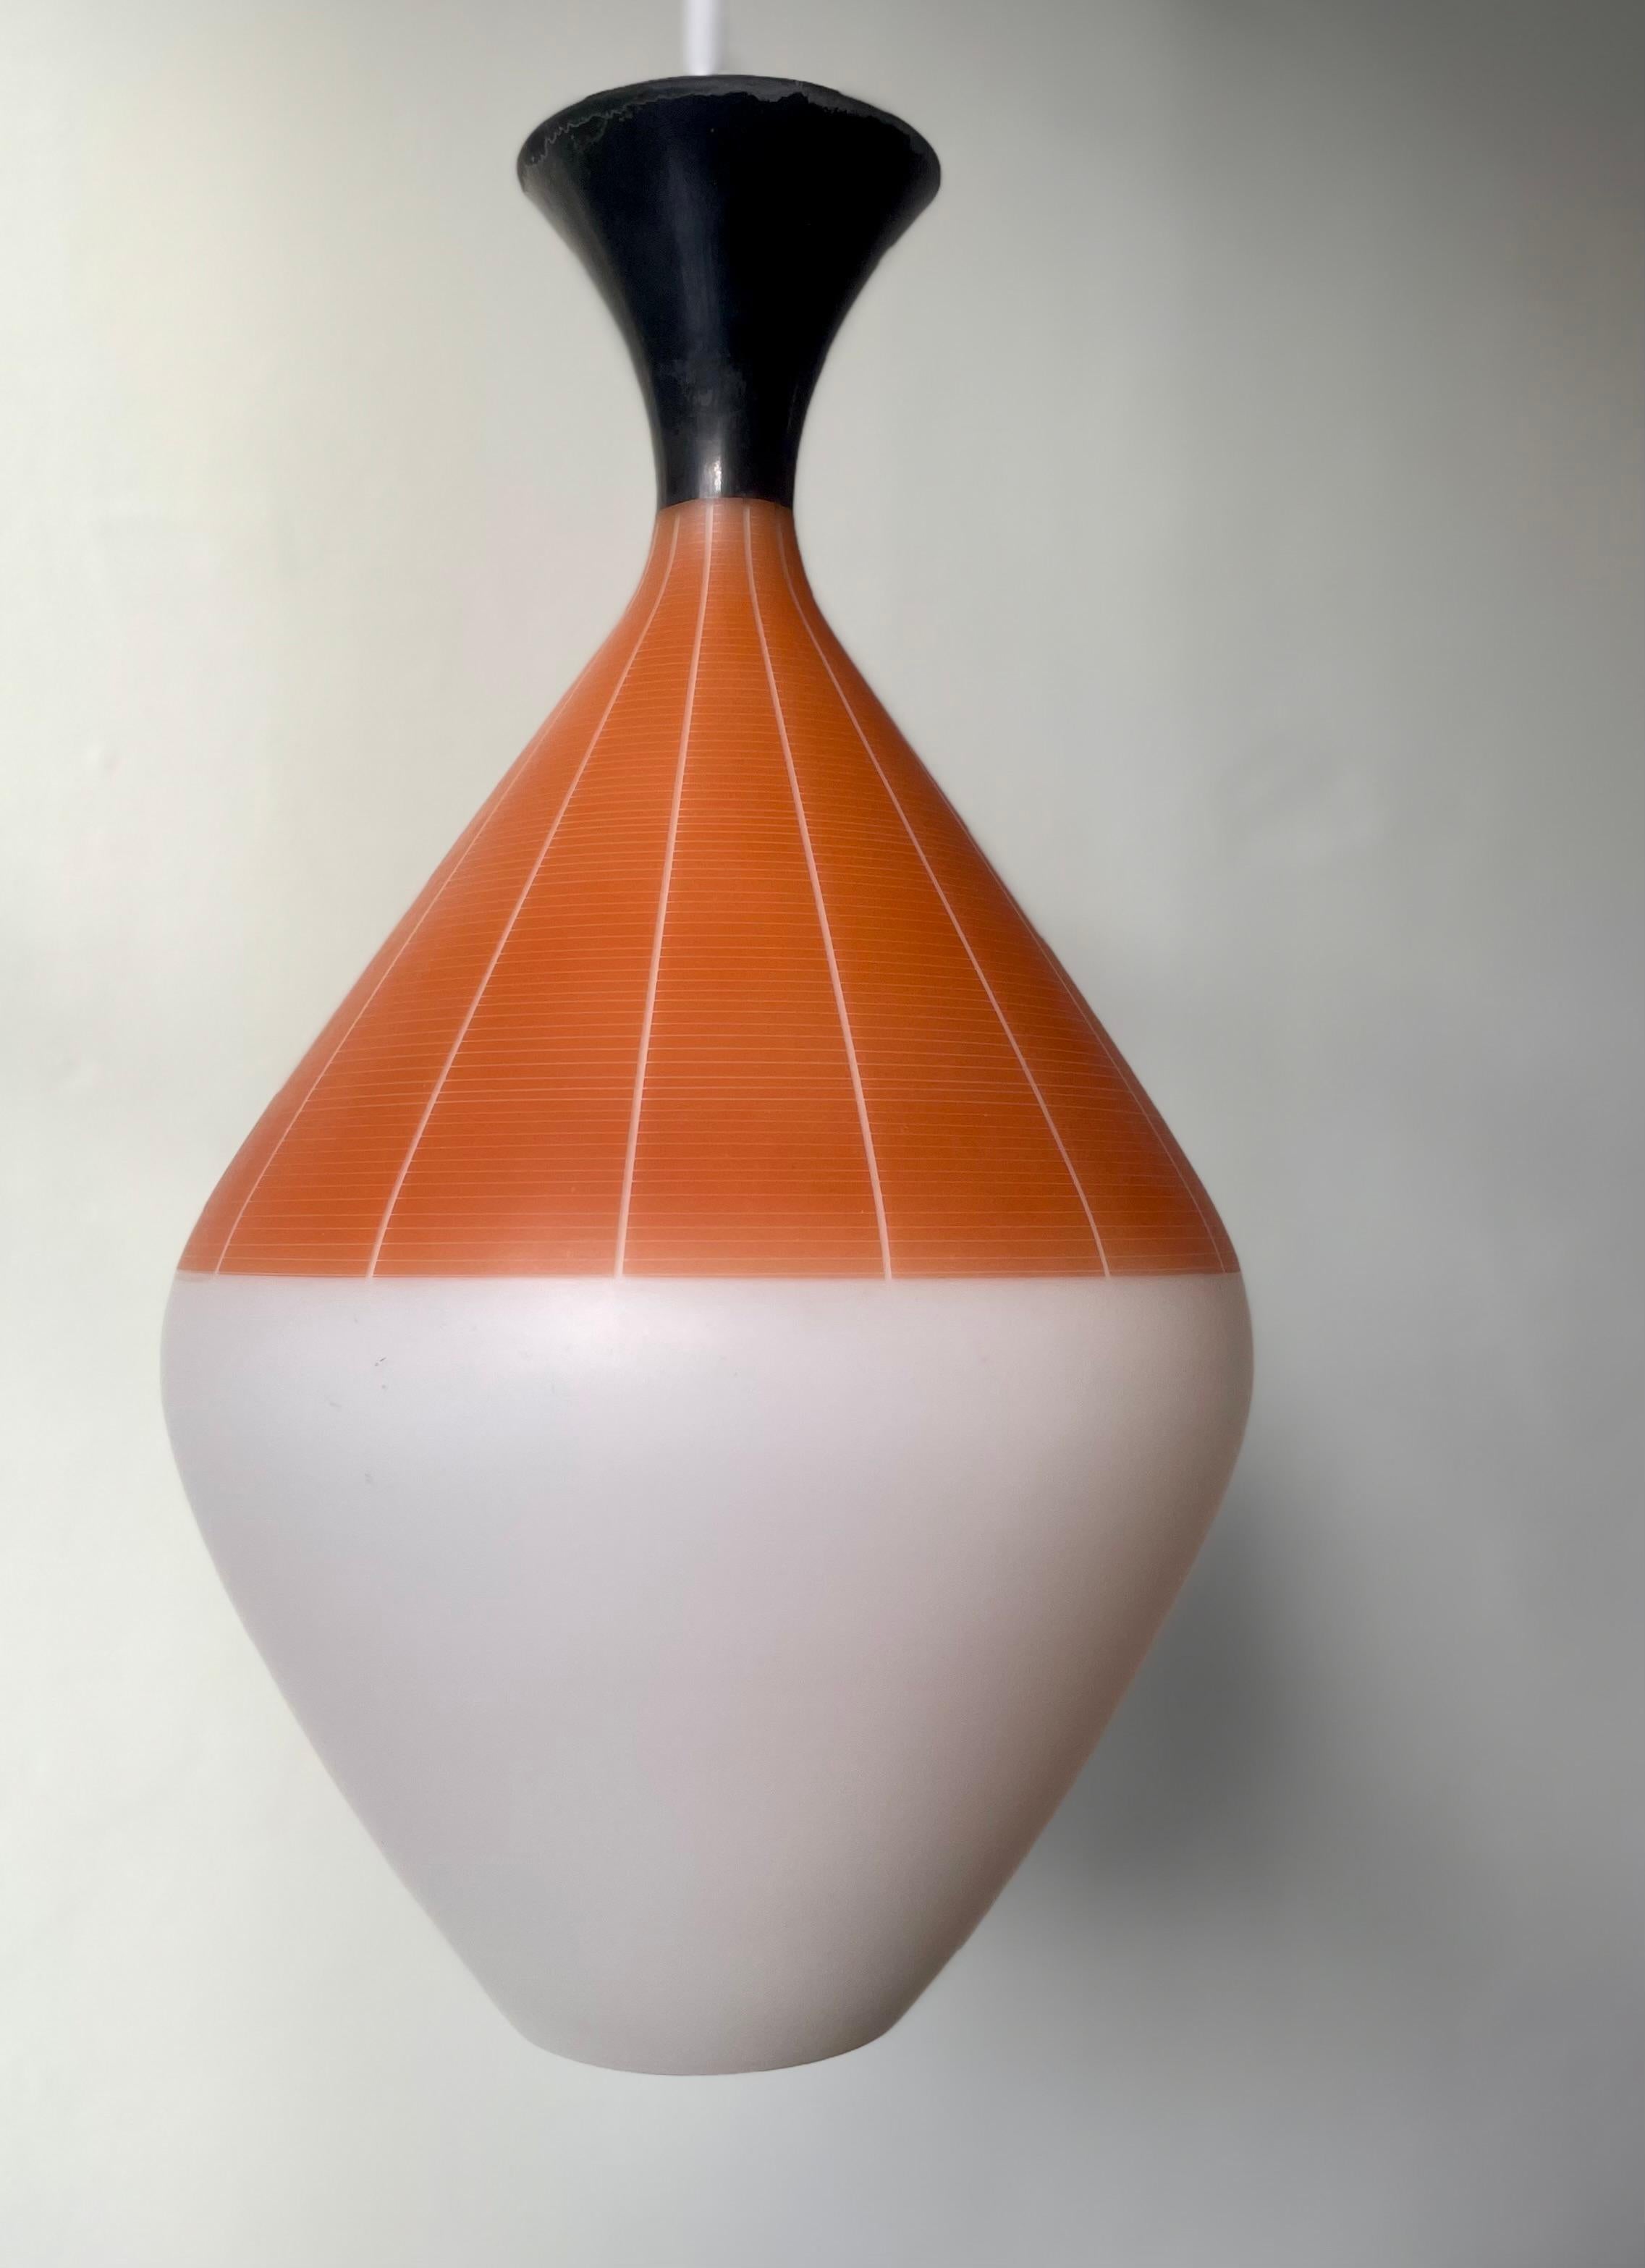 Large white opaline glass pendant with flared black top and stunning matte orange modernist decor with slender vertical lines and elegantly narrow horisontal lines. Manufactured in Italy in the 1950s attributed to Stilnovo. Beautiful vintage